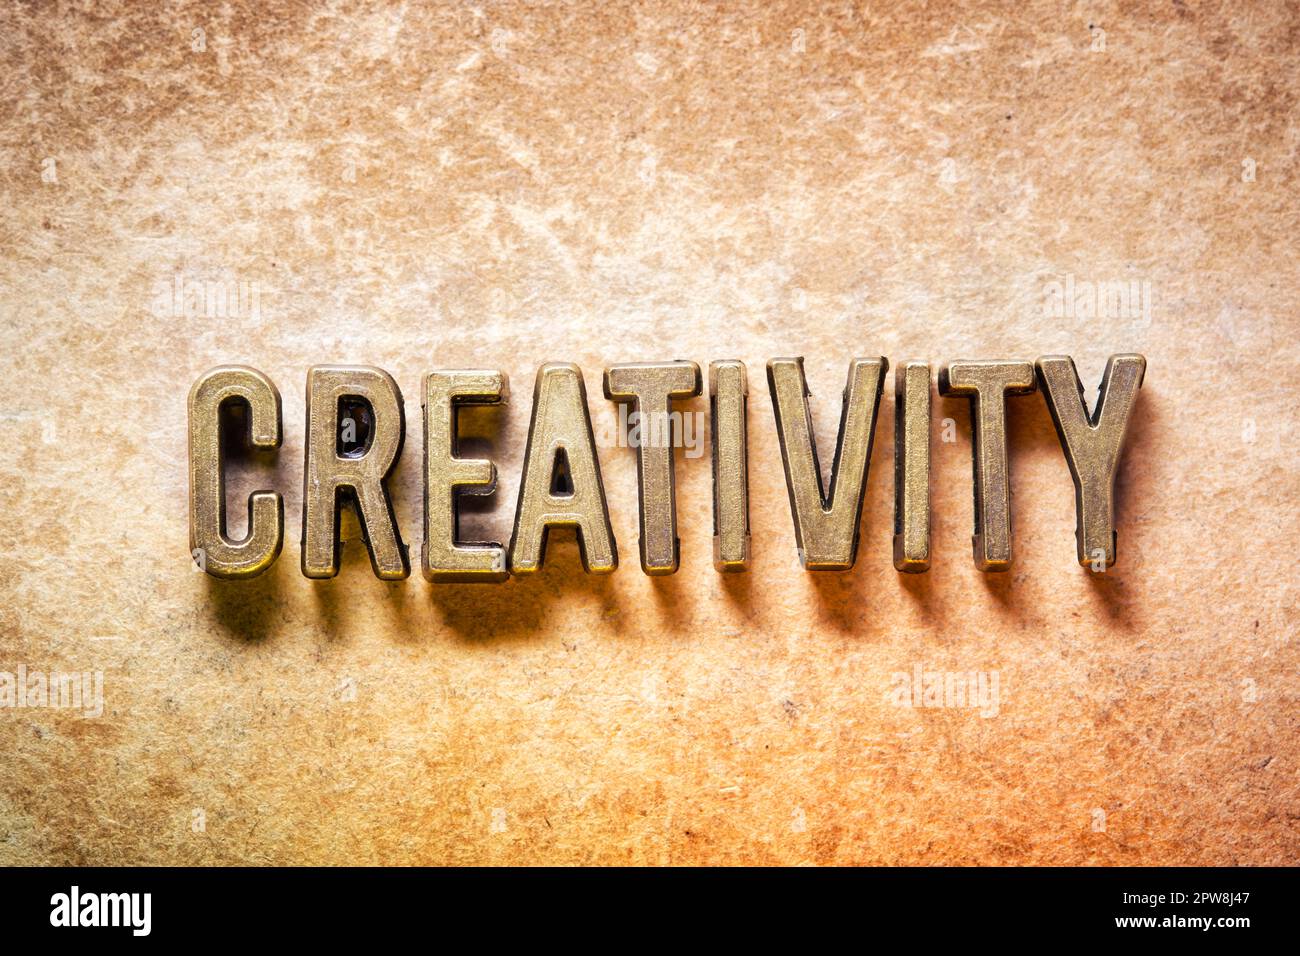 creativity word made from metallic letters on grunge background Stock Photo